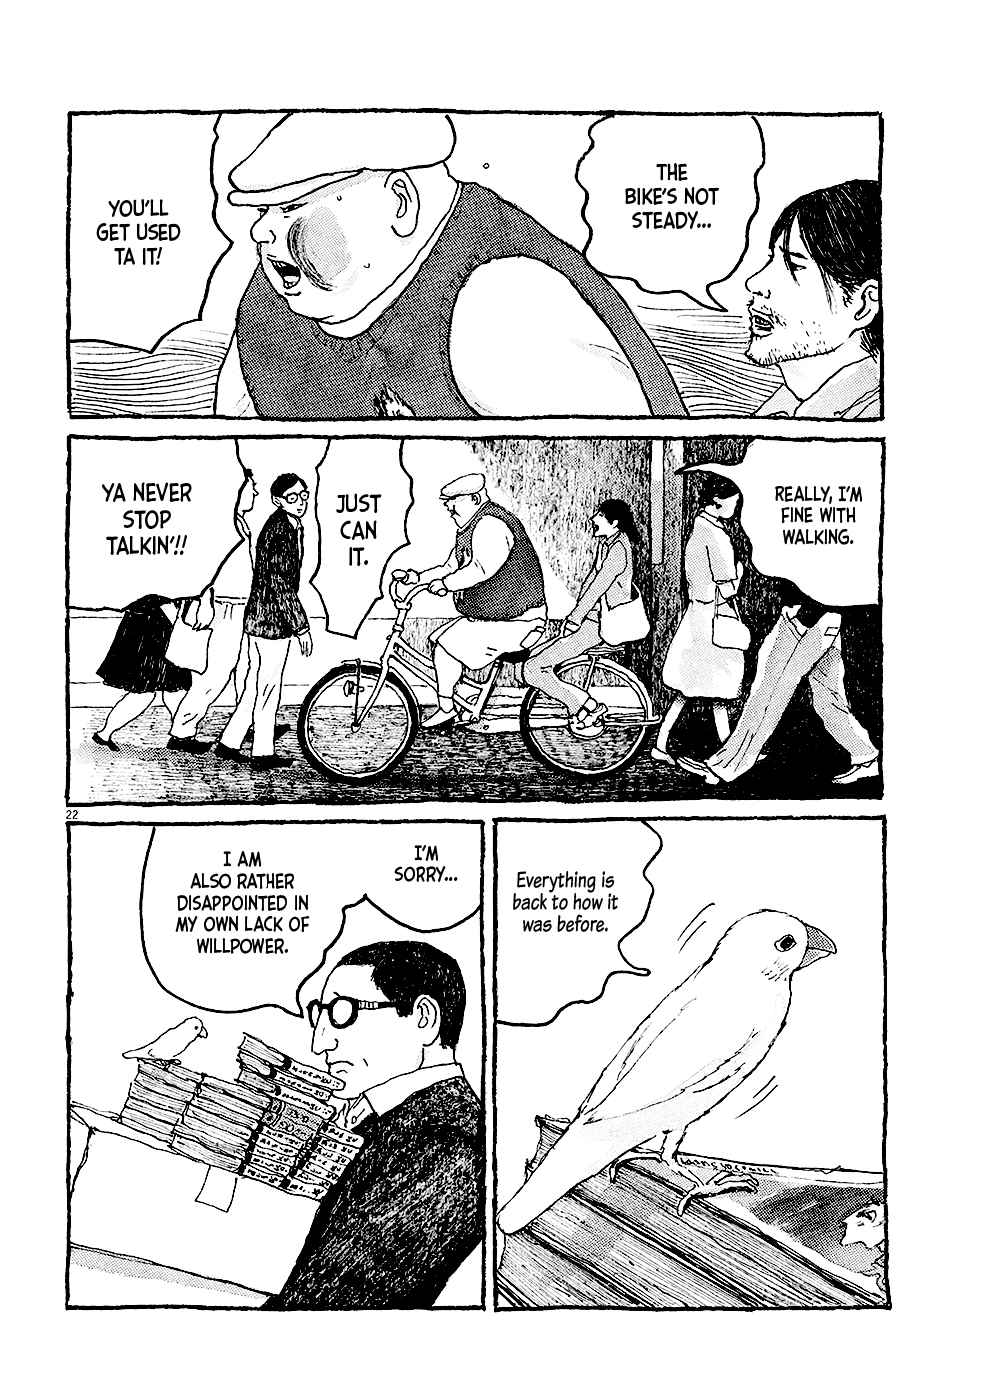 Tokyo Higoro Ch. 4 Today, I contact a used bookstore, and part ways with my manga.